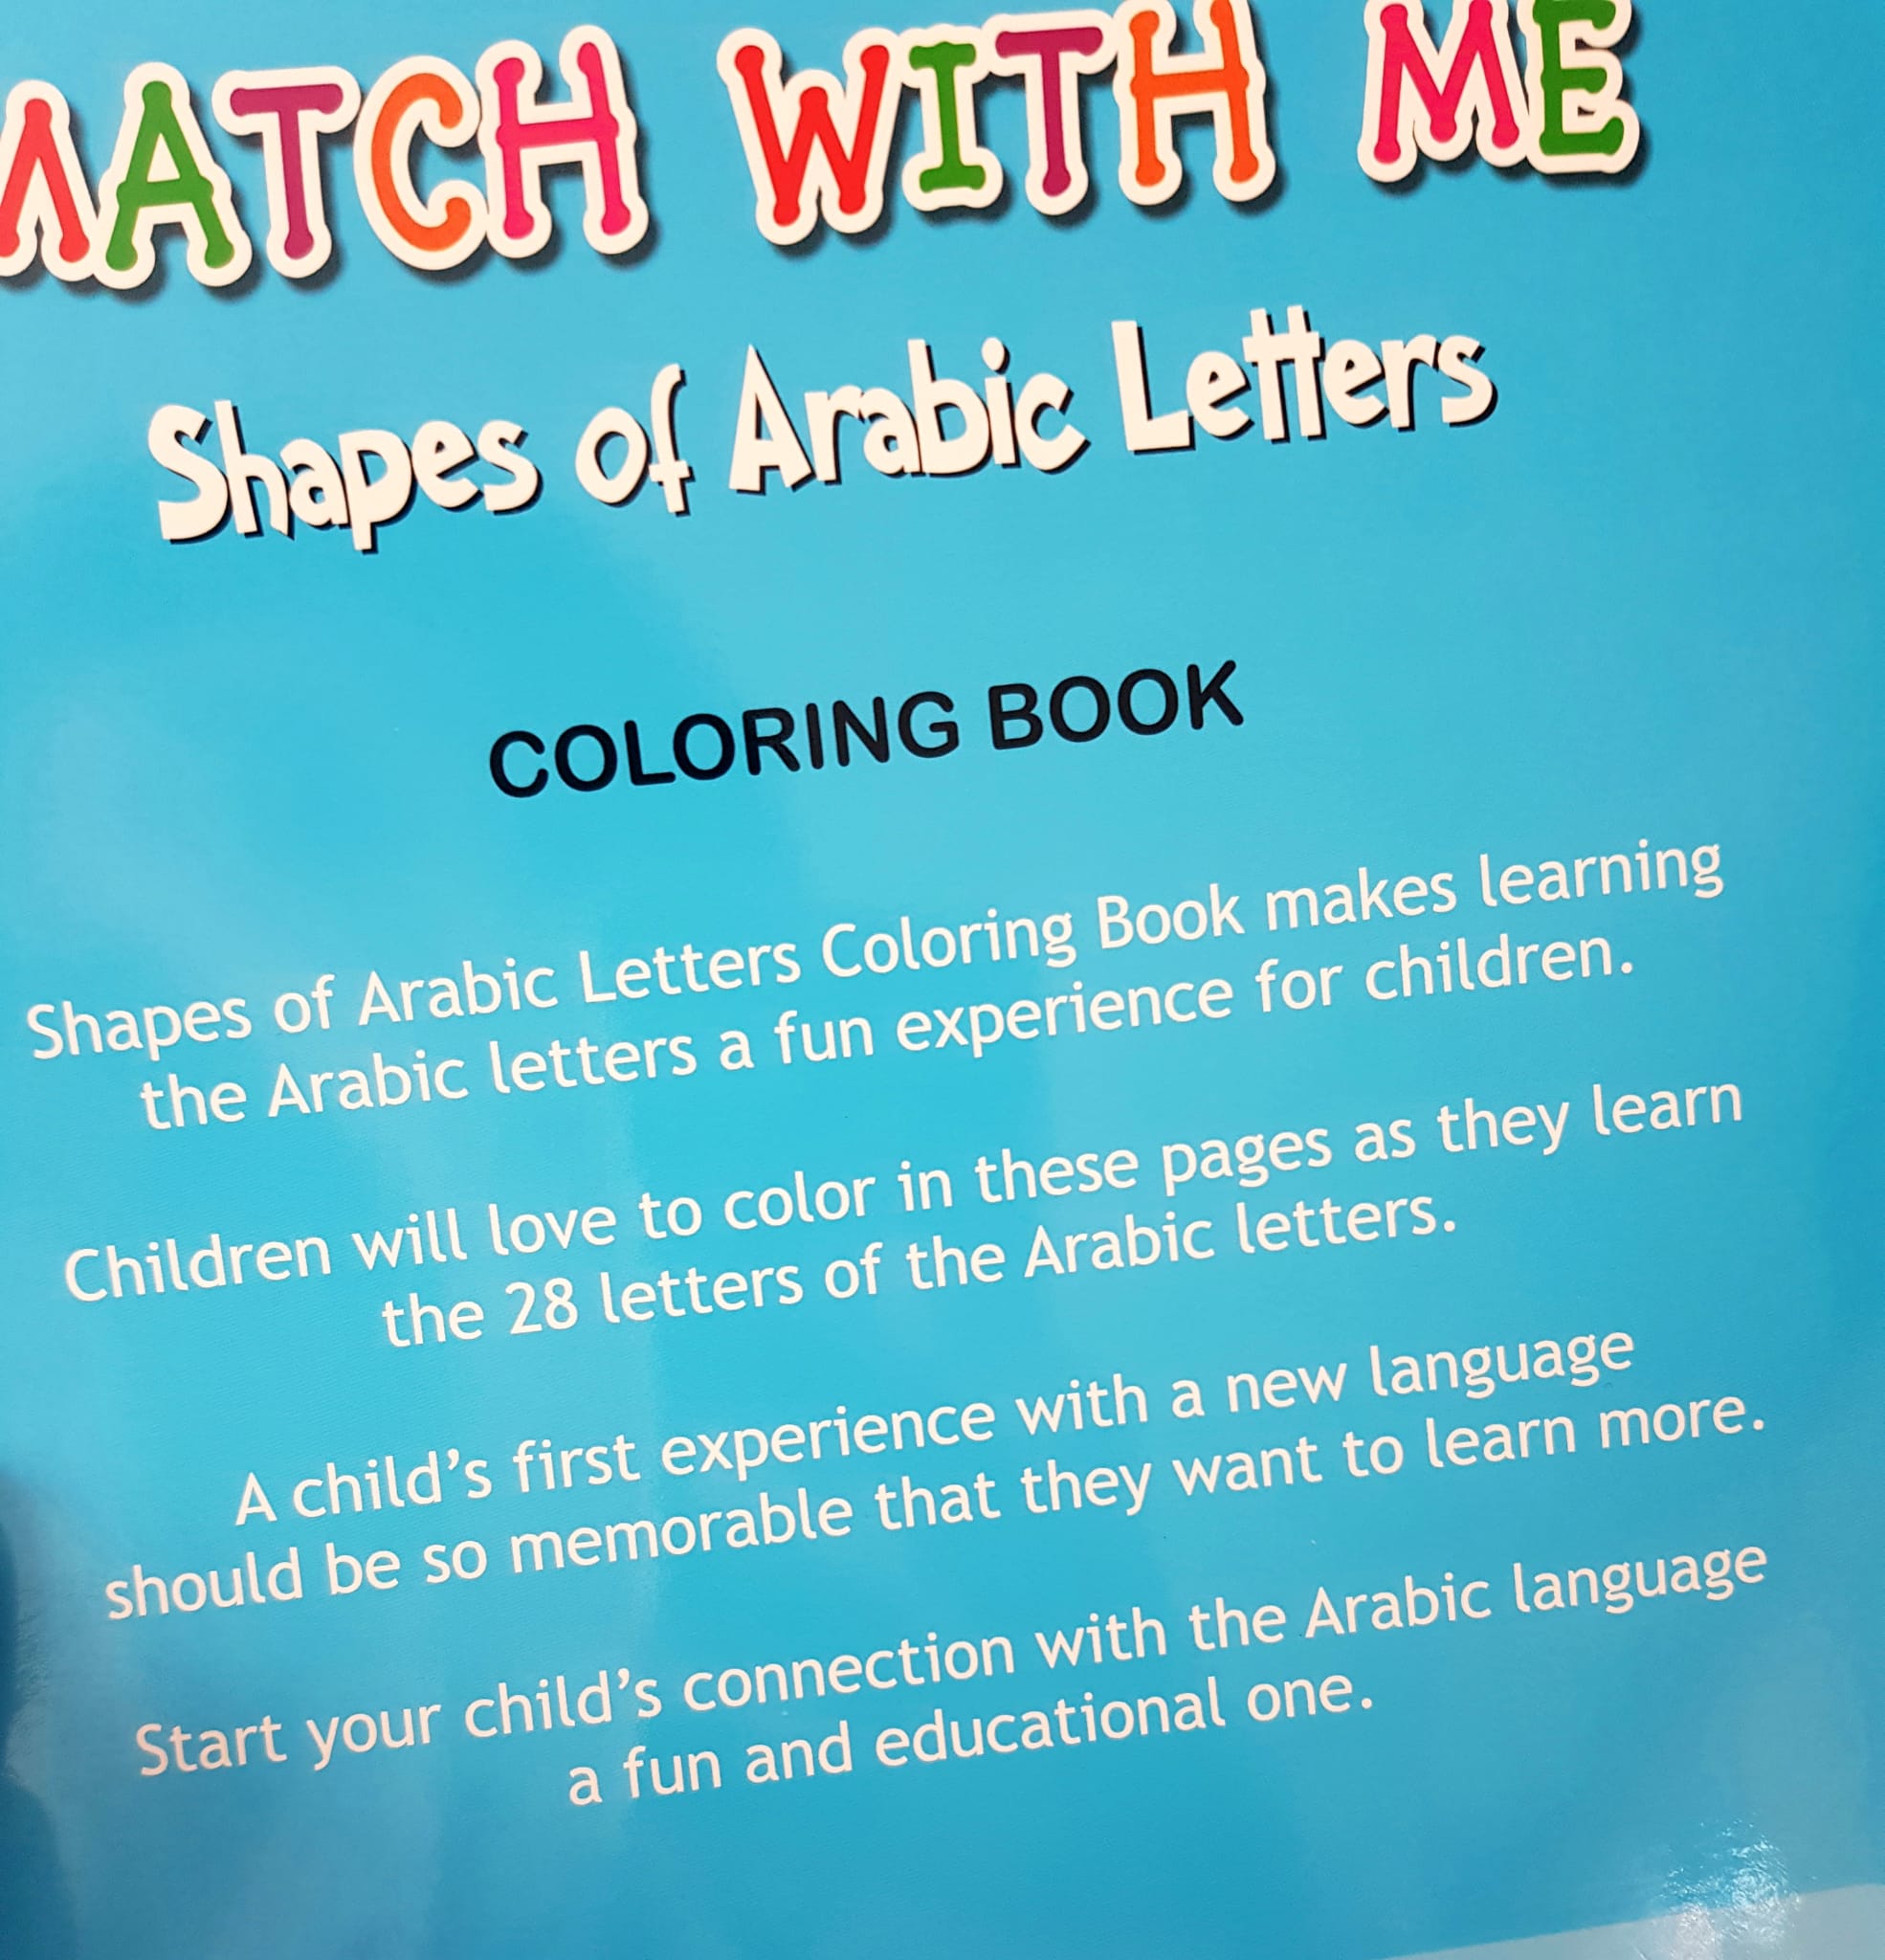 Match With Me: Shapes of Arabic Alphabet/Letters (Colouring Book)